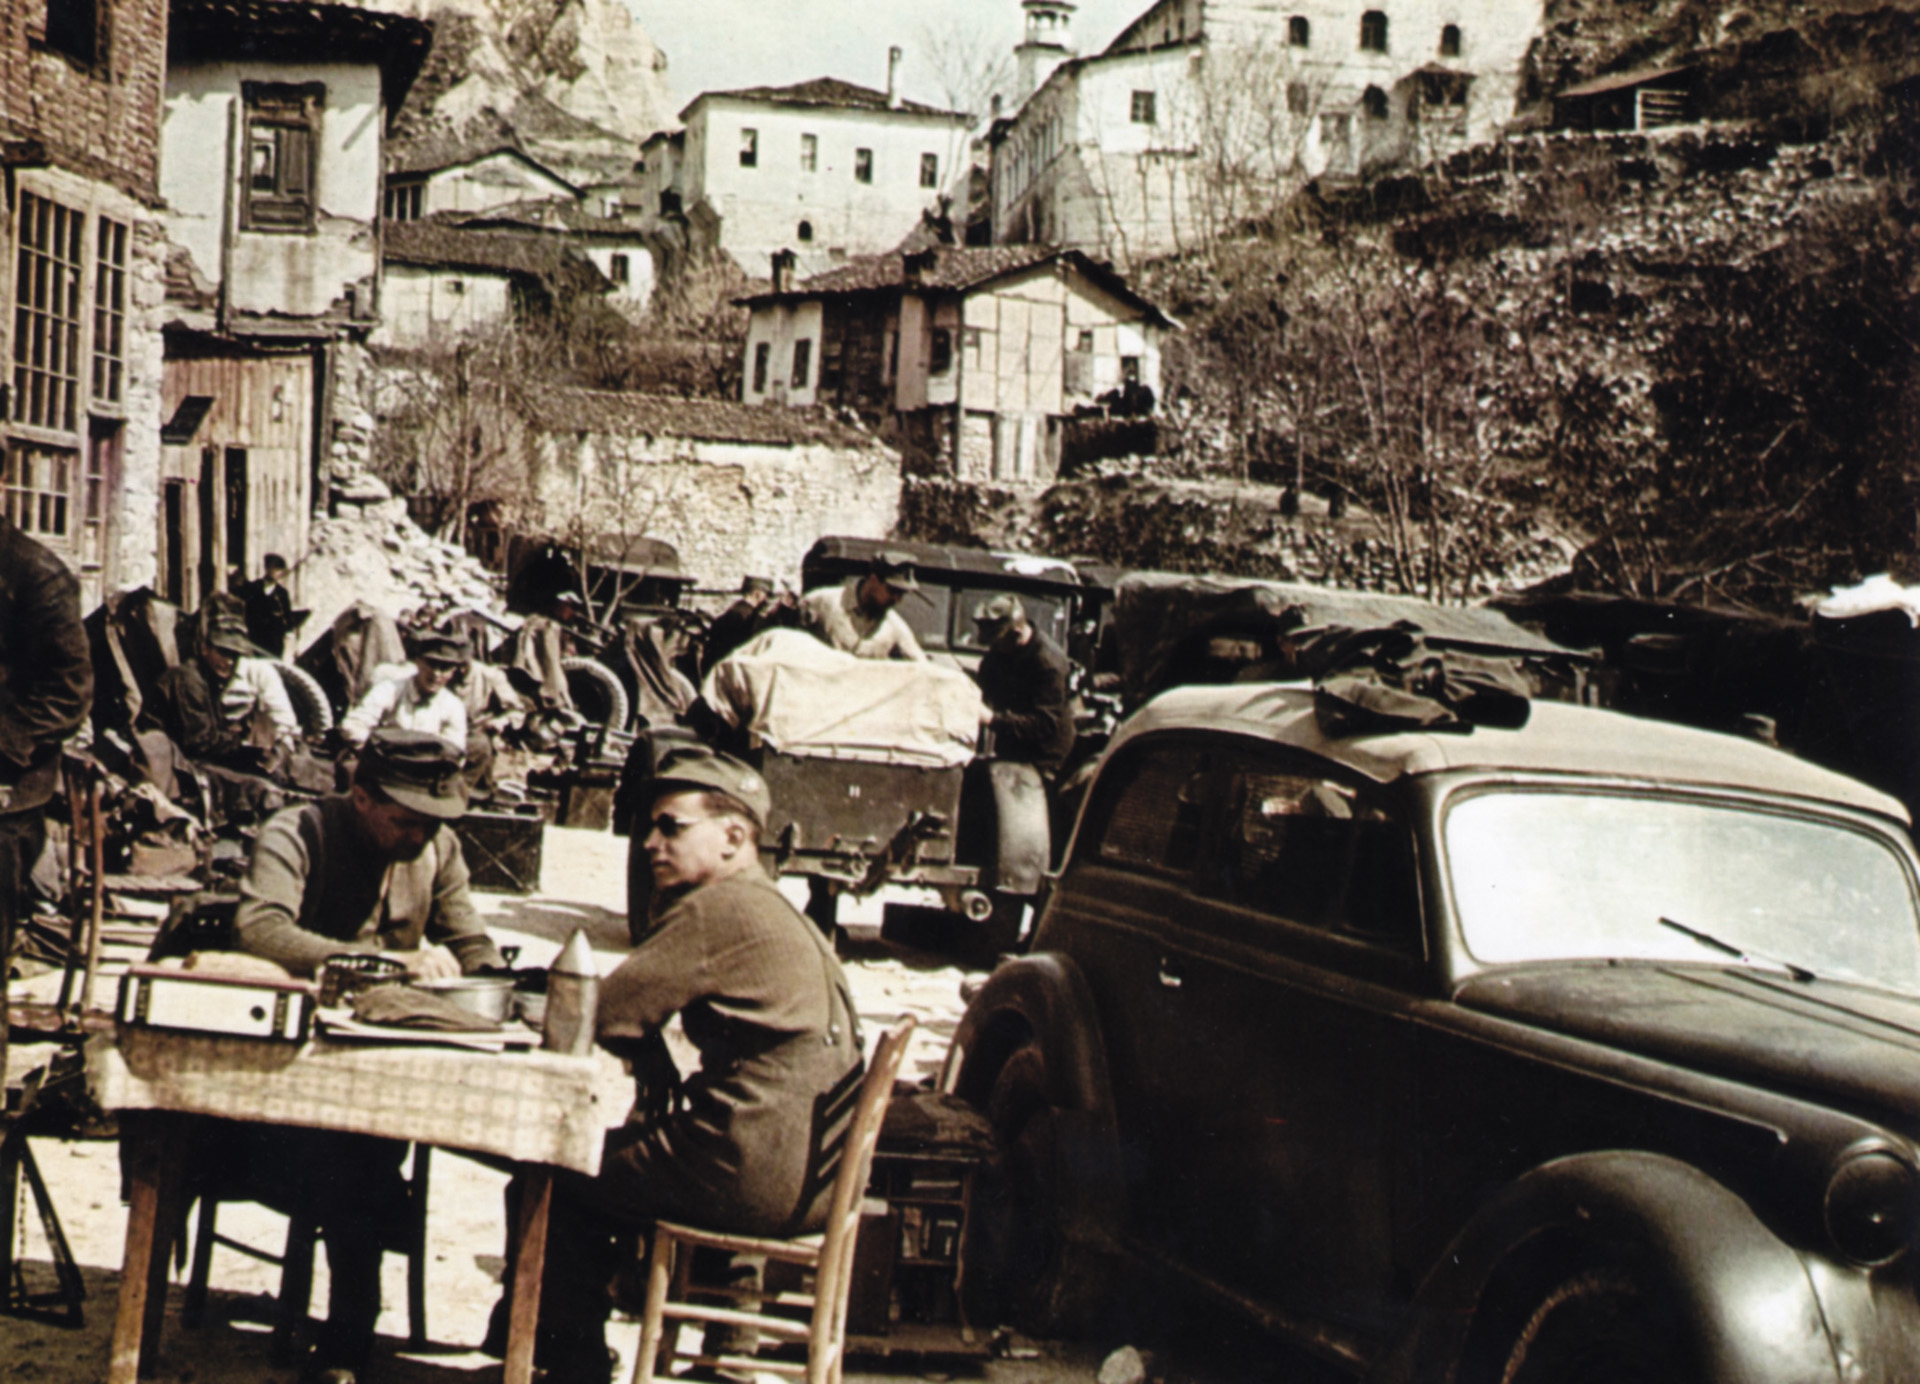 German Alpine troops relax at a table in a small Bulgarian town. Hitler’s Eastern European allies were restive at times, requiring action on the part of the Fuhrer to keep them in line.